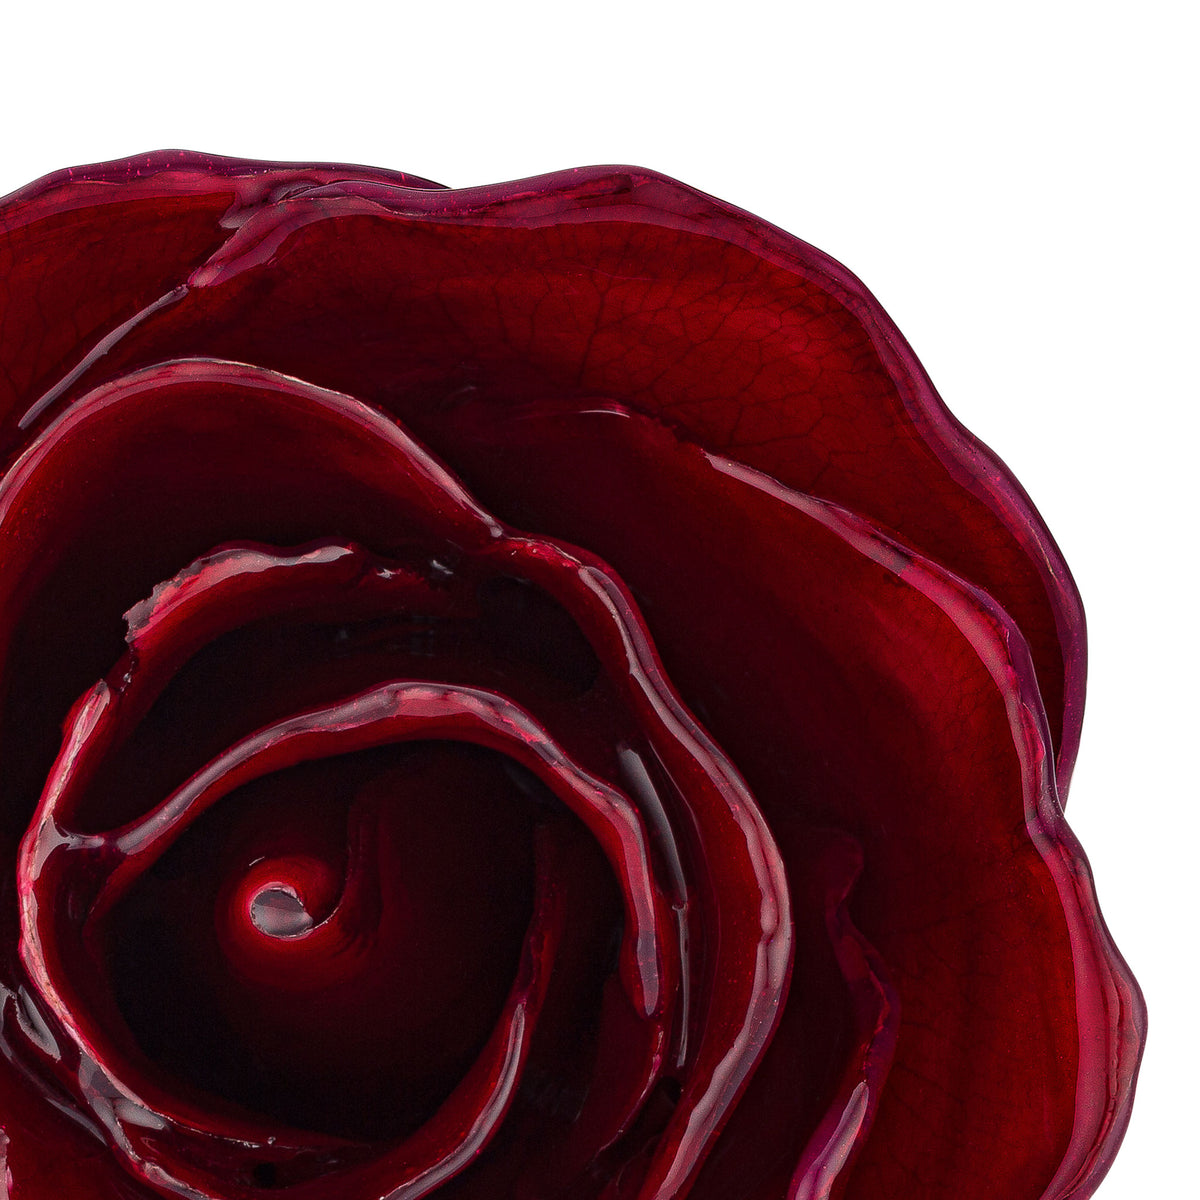 Natural (Green Stem) Forever Rose with Deep Red, Burgundy Colored Petals. View of Stem, Leaves, and Rose Petals. This a Forever Rose without any gold or other precious metals on it. zoomed in view from top.